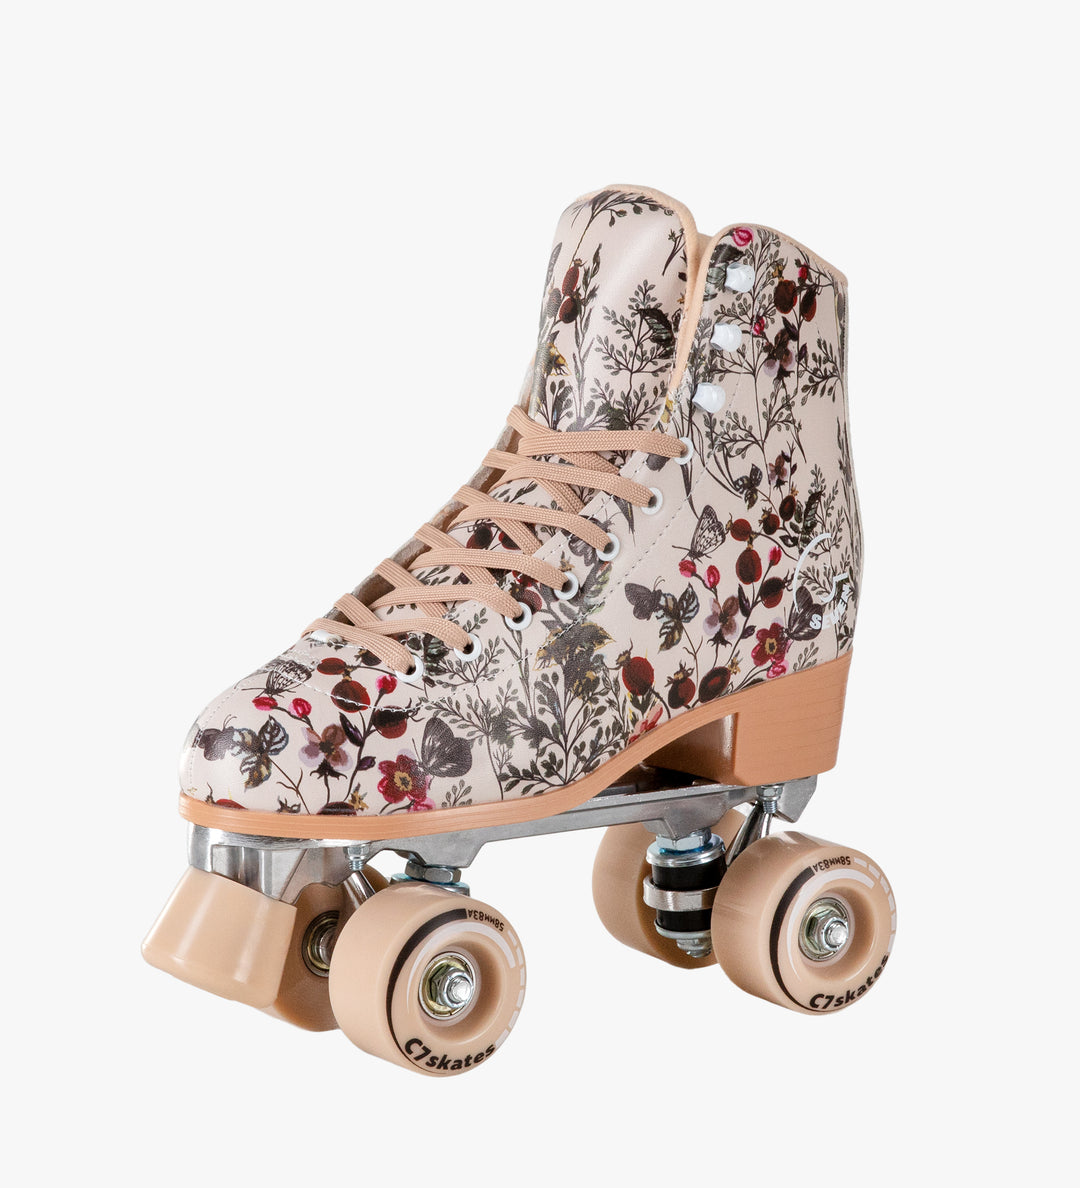 cream floral print butterflies quad roller skates with removable toe stops, 58mm 83A wheels and structured boot